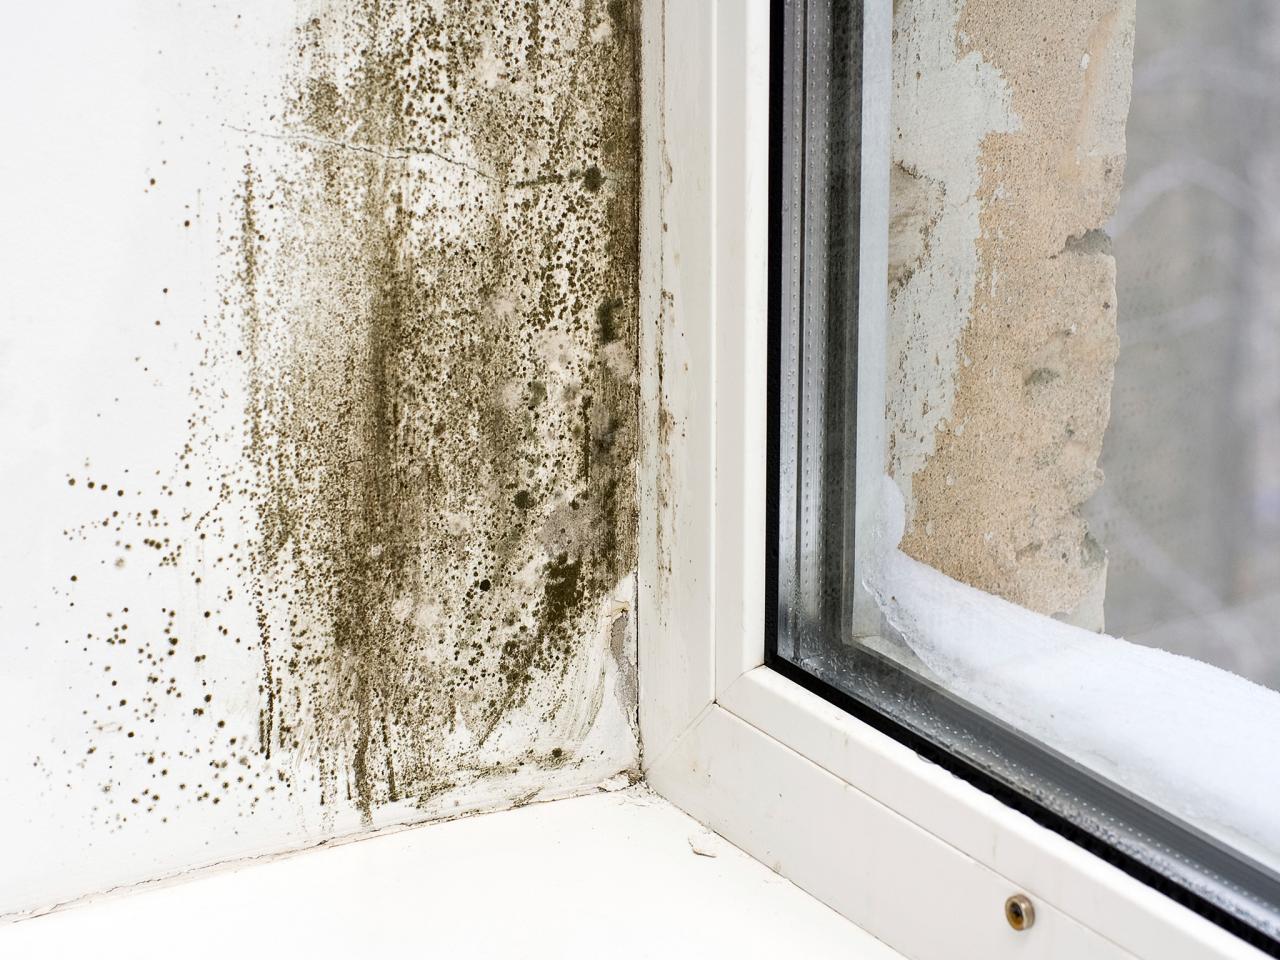 Mold growth by a glass window.